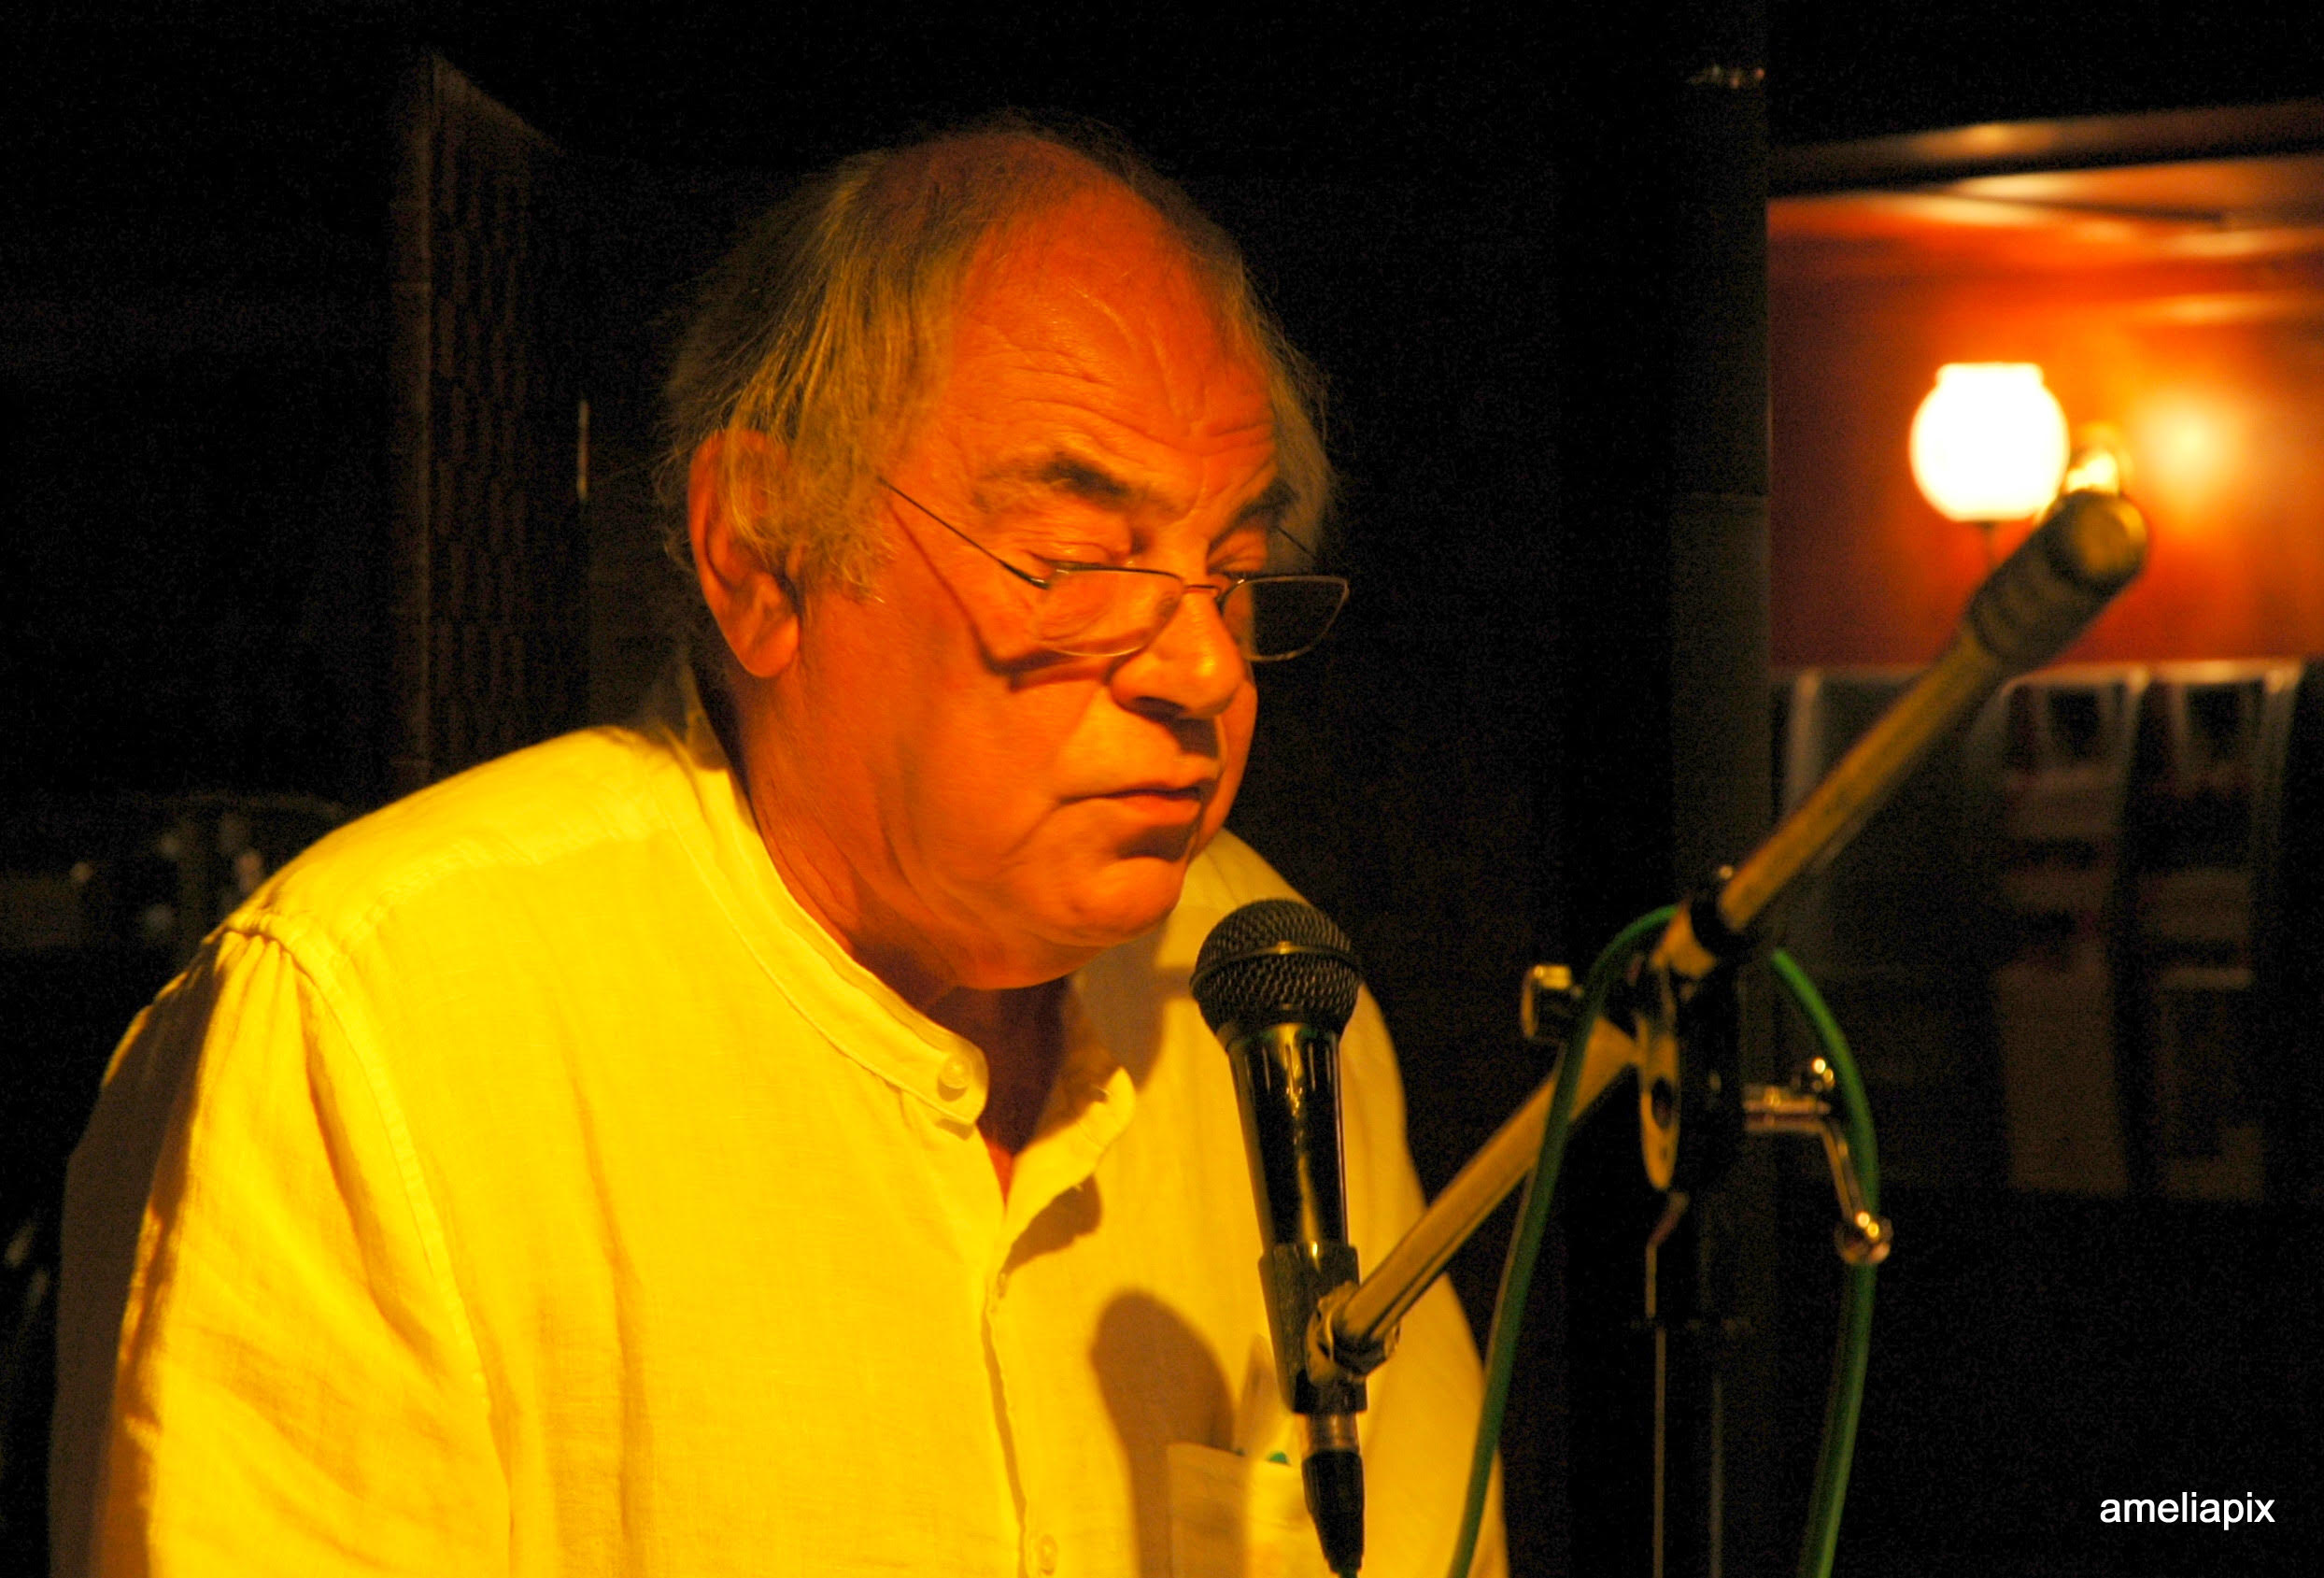 Tony Sheppard sitting at a microphone in a dimly lit nautical space.